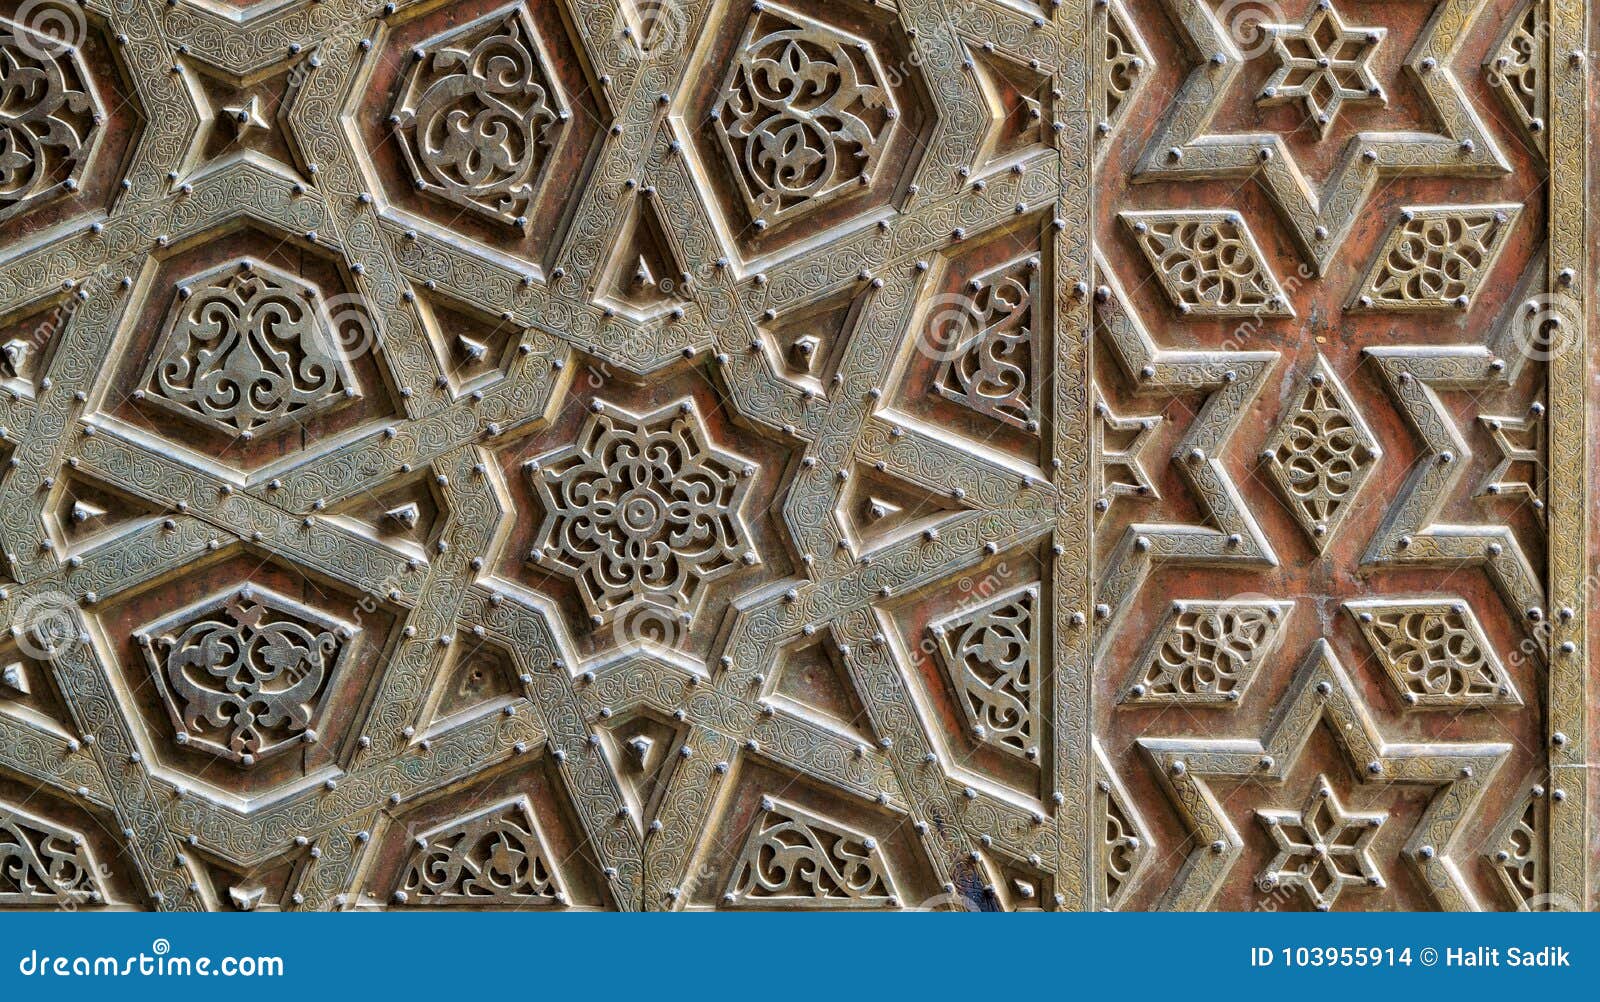 ornaments of the bronze-plate door of sultan qalawun mosque, old cairo, egypt